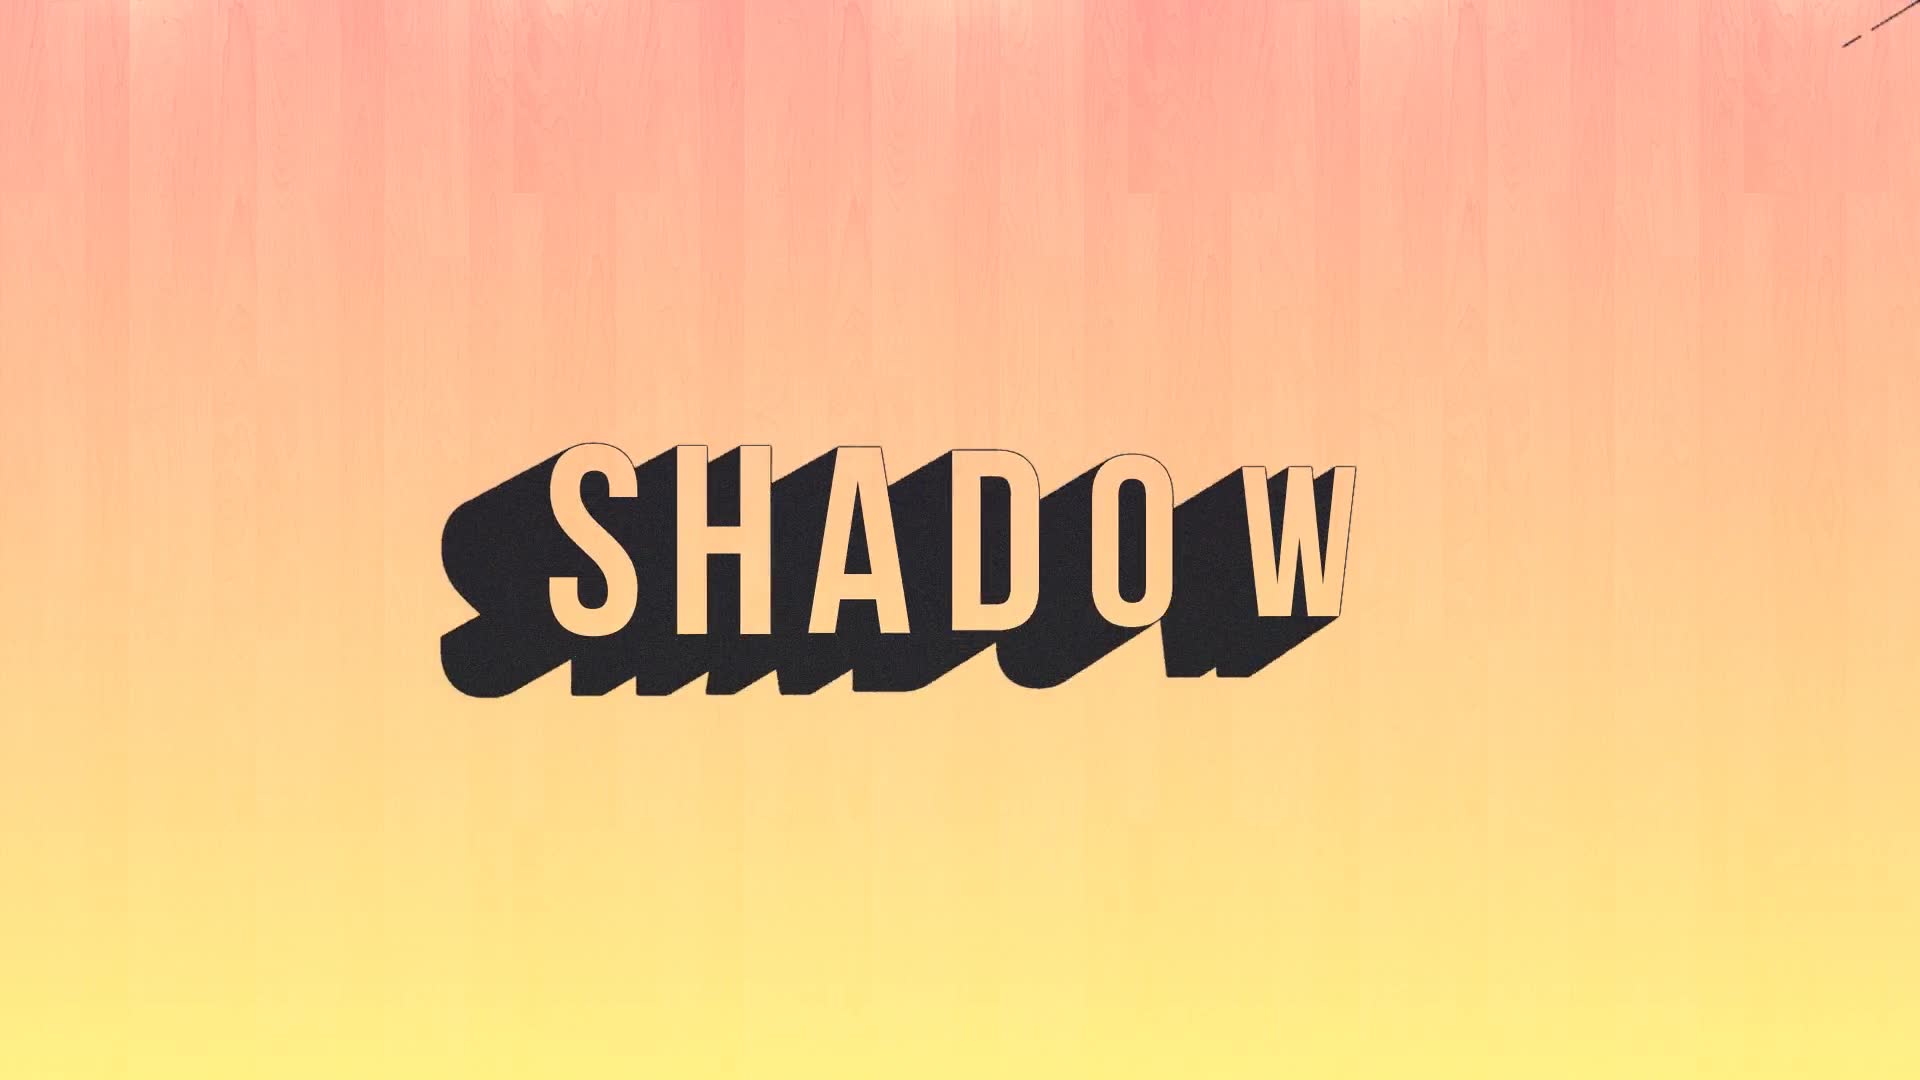 Advanced Shadow - Download Videohive 21222364